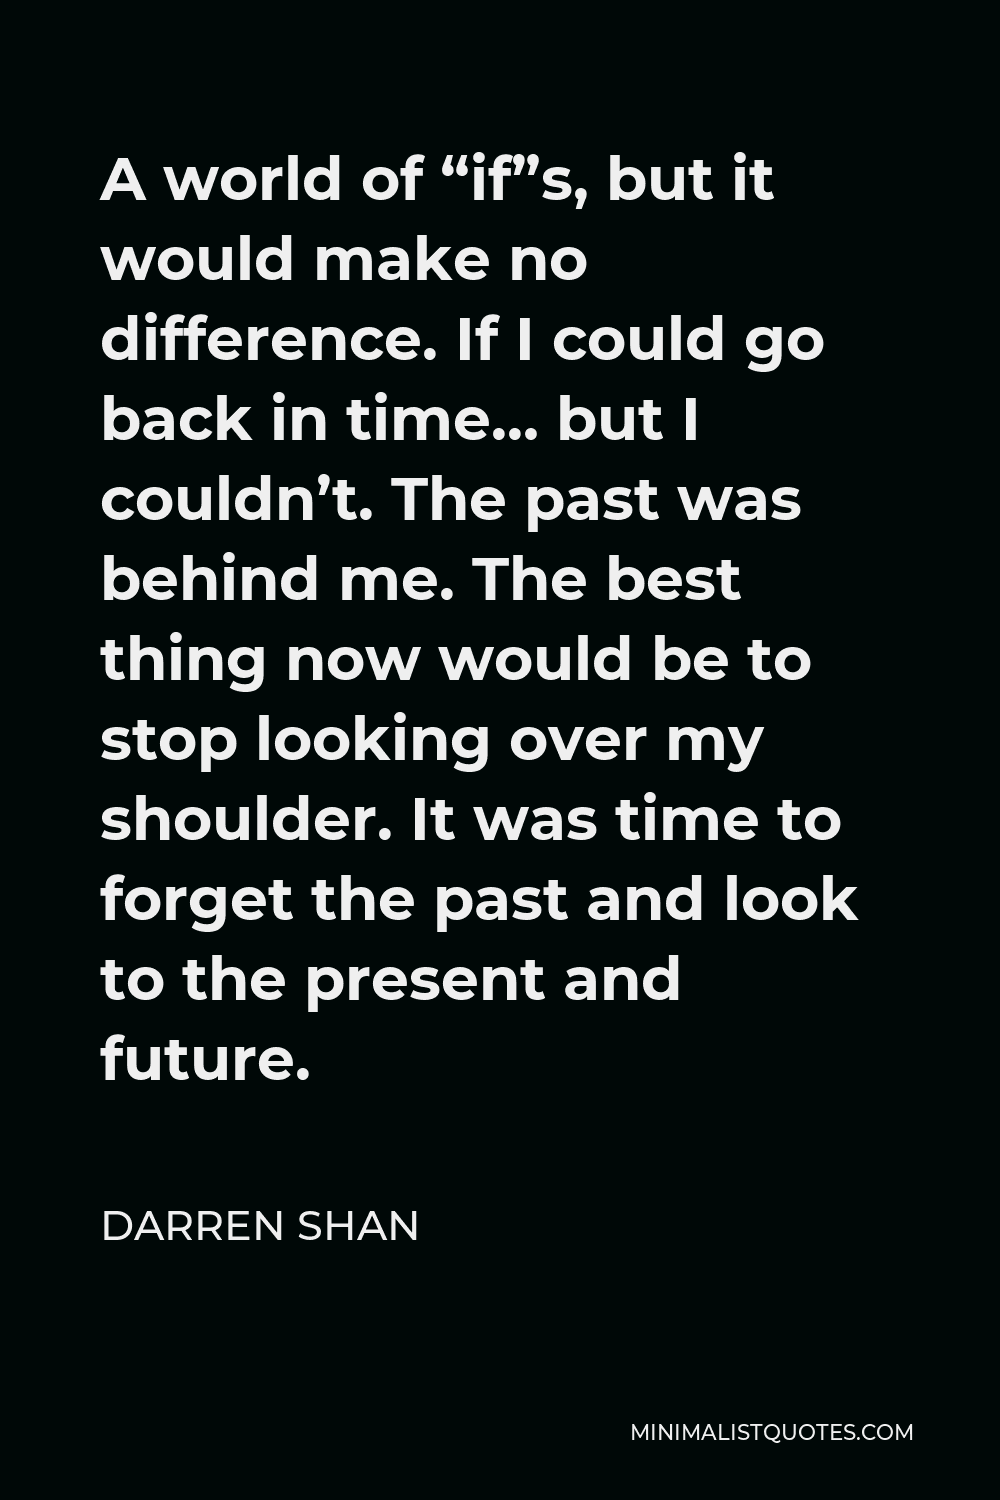 Darren Shan Quote - A world of “if”s, but it would make no difference. If I could go back in time… but I couldn’t. The past was behind me. The best thing now would be to stop looking over my shoulder. It was time to forget the past and look to the present and future.